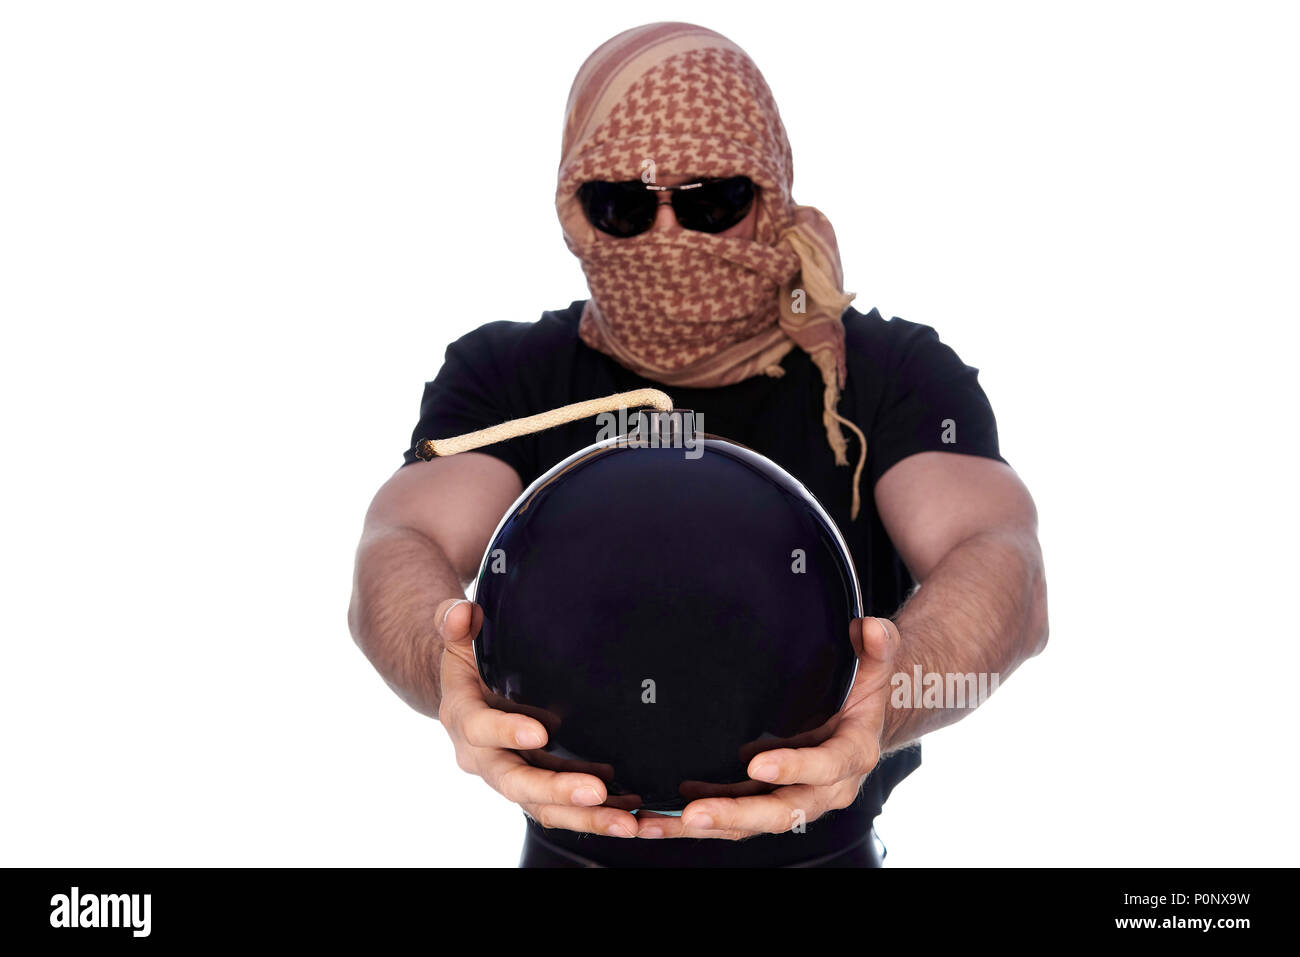 A lighted bomb in the outstretched hands of a young man hidden under a arafatka and black glasses on a white background. Stock Photo